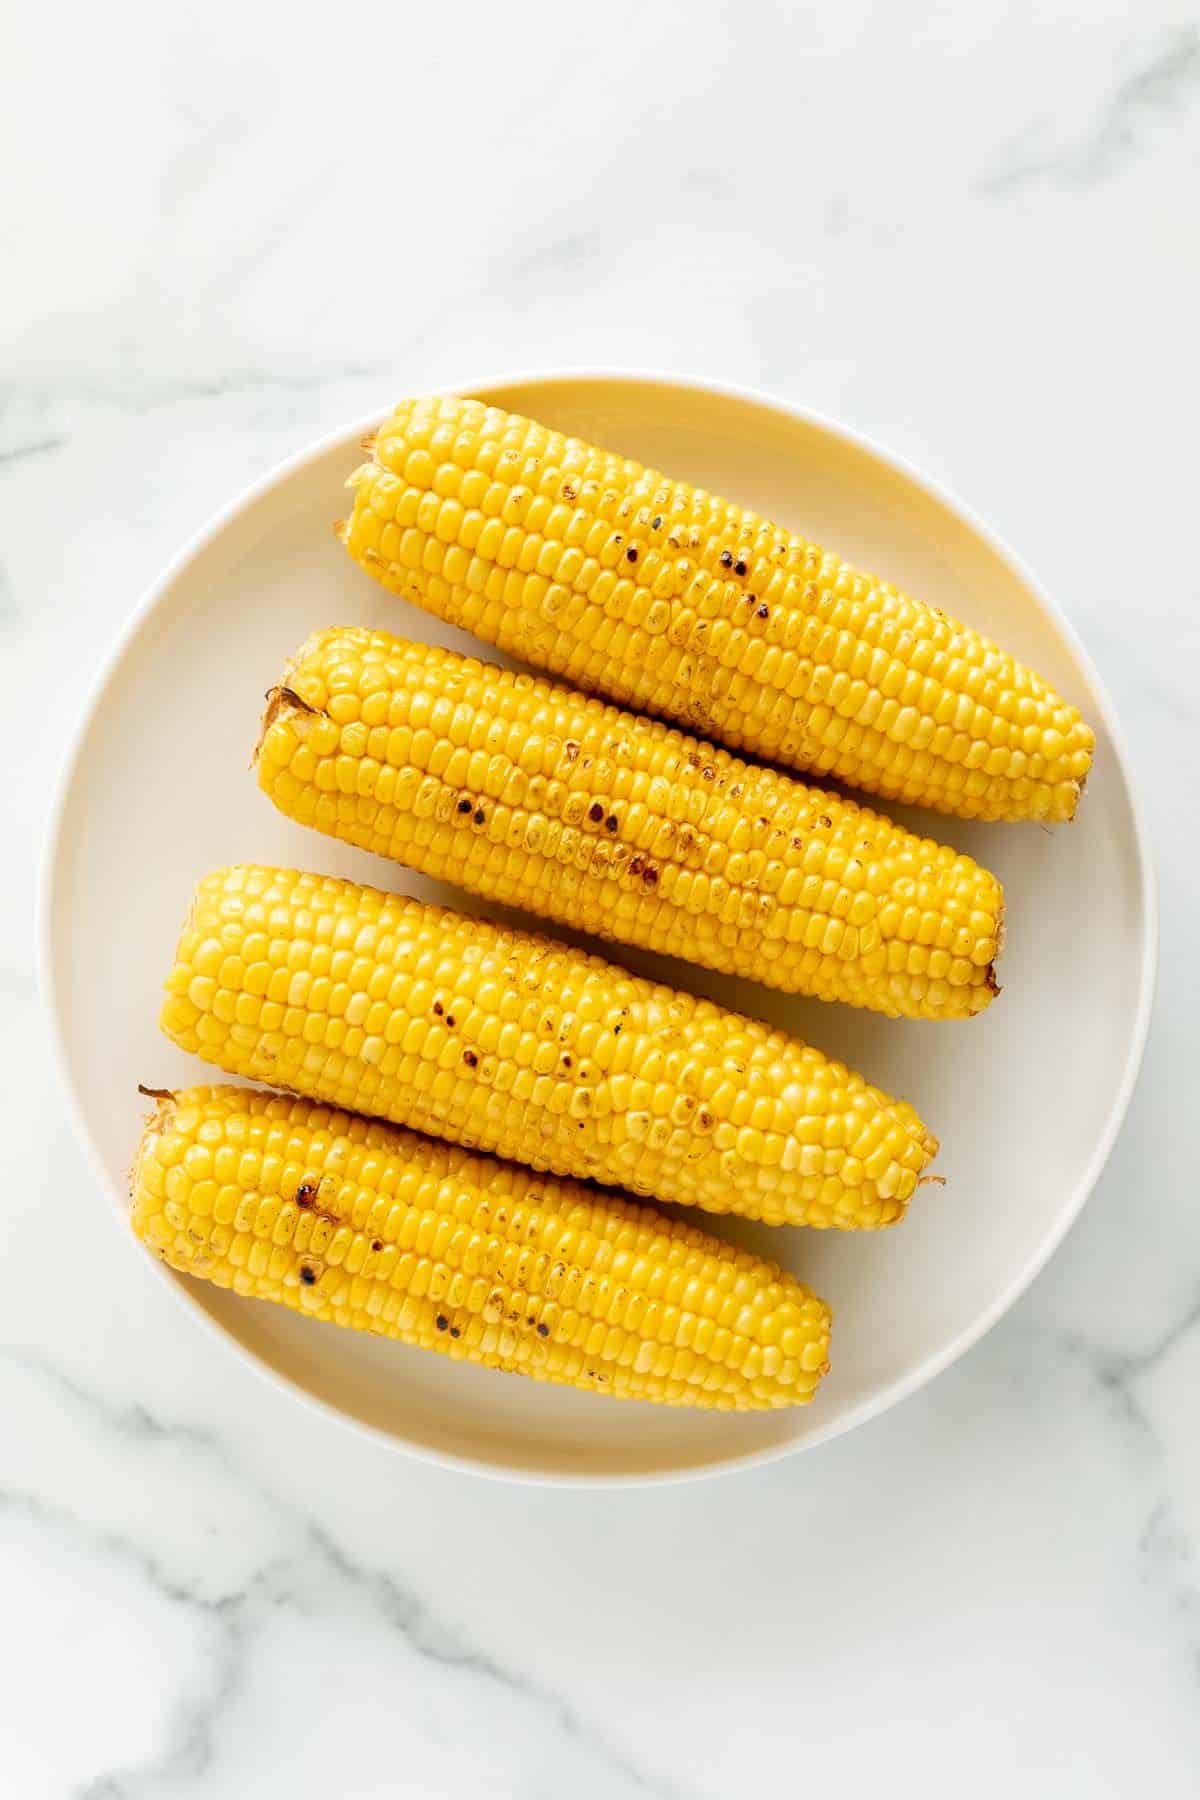 Grilled corn on the cob on a white plate for a side dish for fish